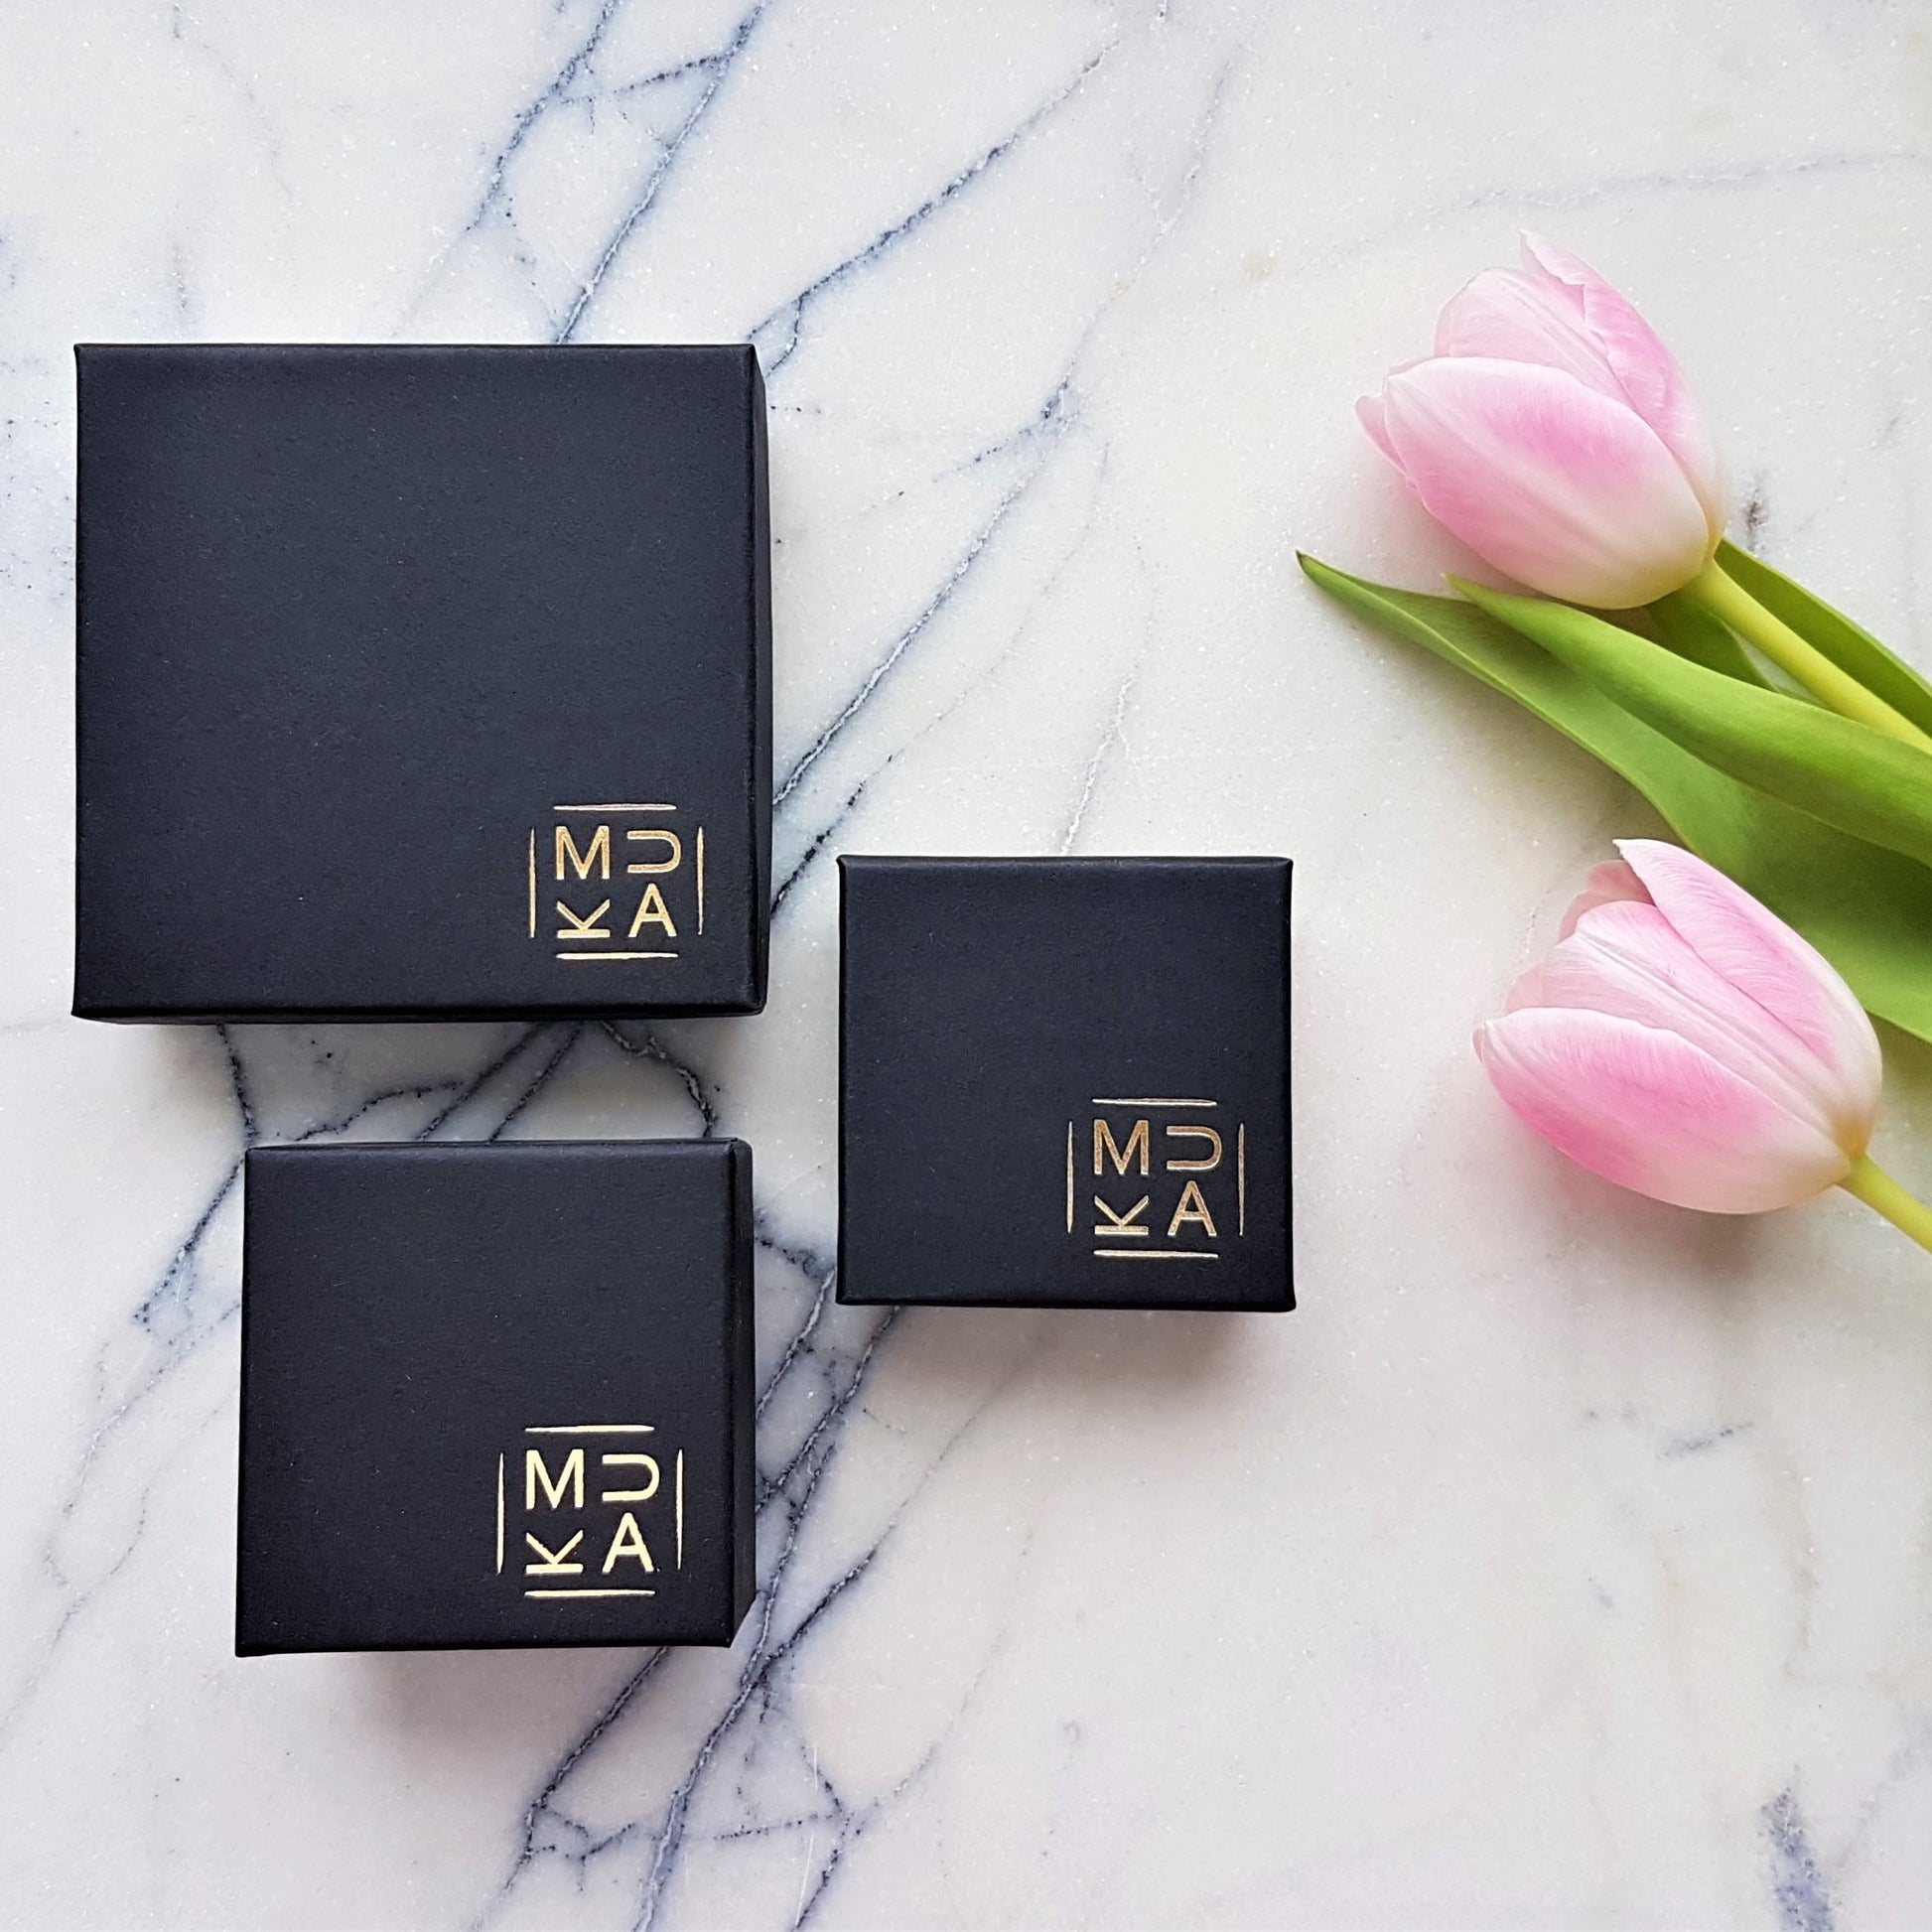 MUKA studio packaging, black jewellery boxes with gold logo sat next to pink tulip flowers